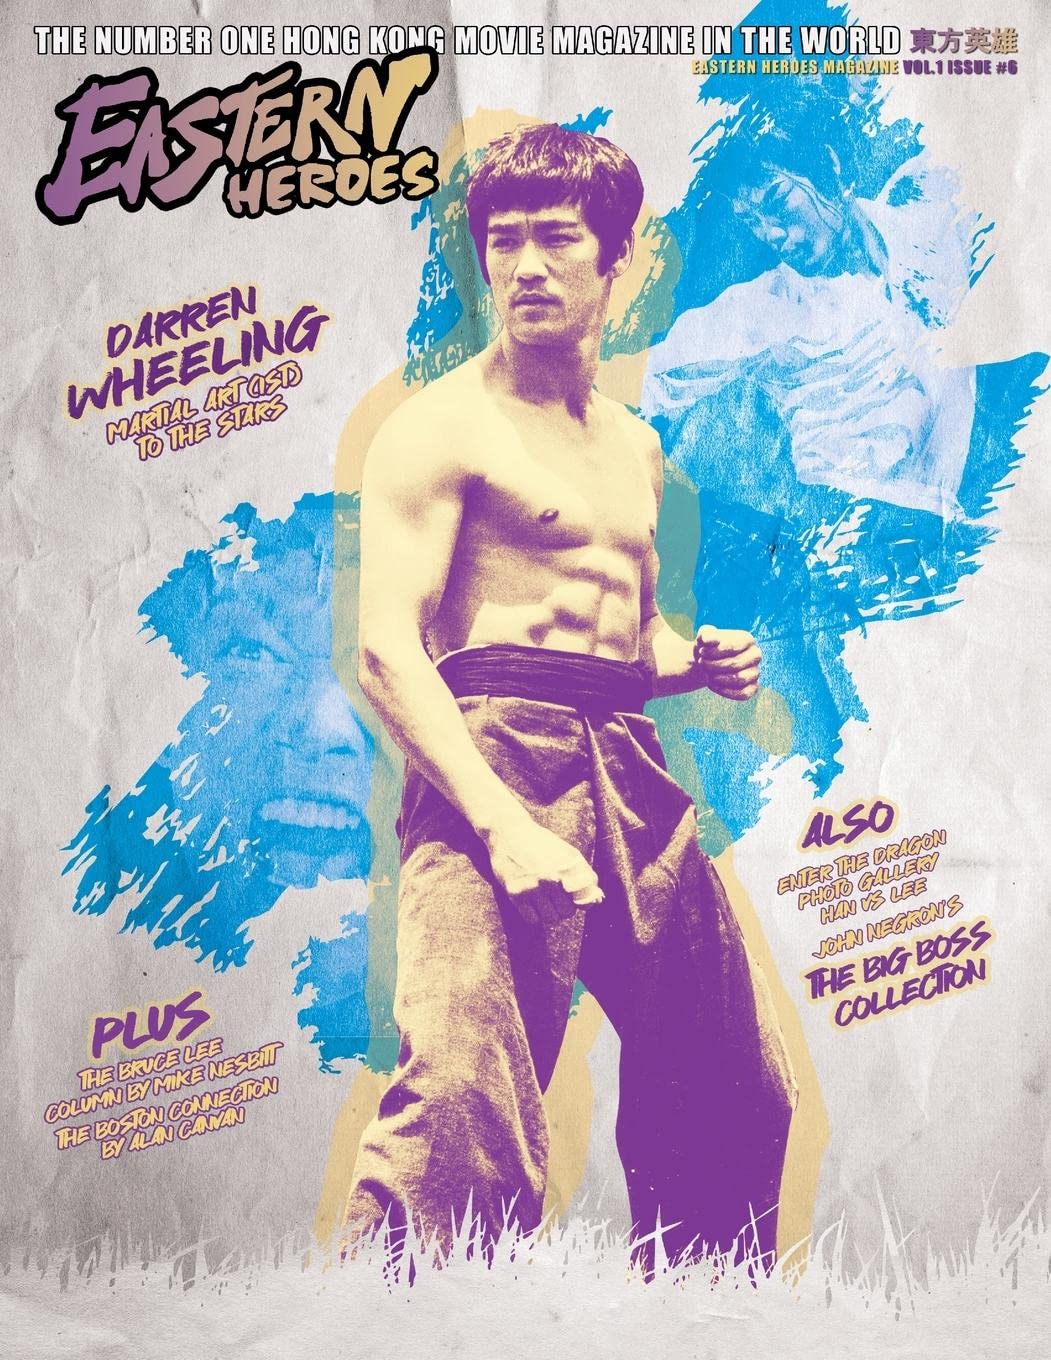 Eastern Heroes Bumper Extended Edition No6 Softback Bruce Lee Special (Paperback)